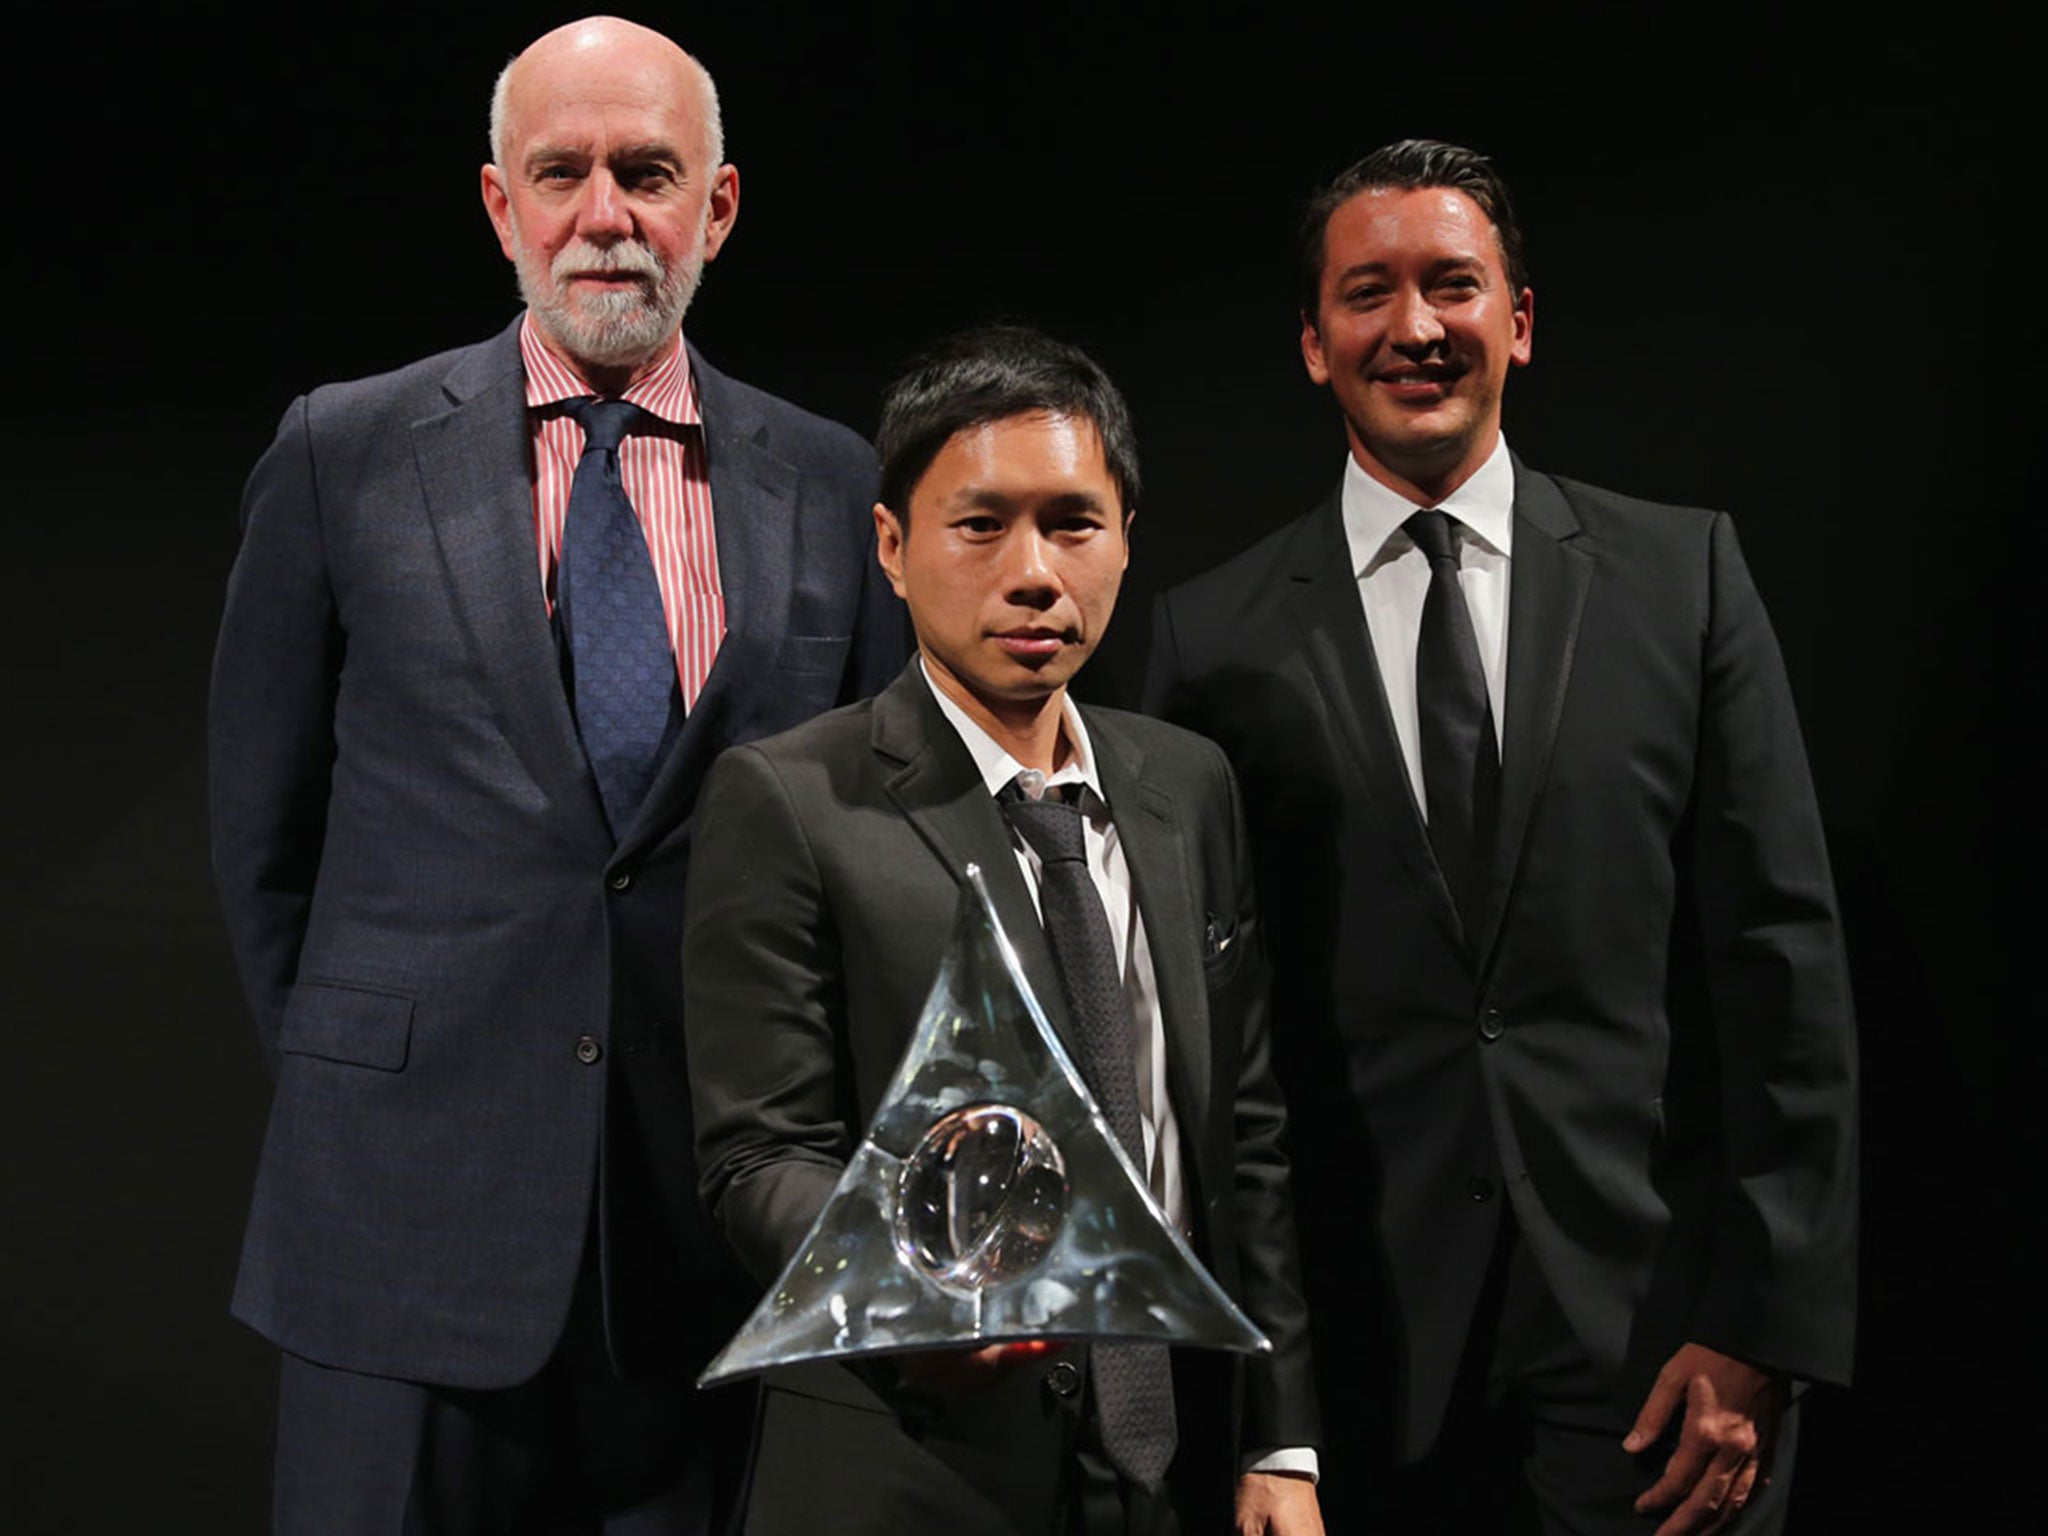 Hugo Boss Prize winner Paul Chan (centre) holds the tetrahedral trophy, alongside Solomon R Guggenheim Museum and Foundation director Richard Armstrong (left) and Hugo Boss Americas CEO and president Gerrit Rützel